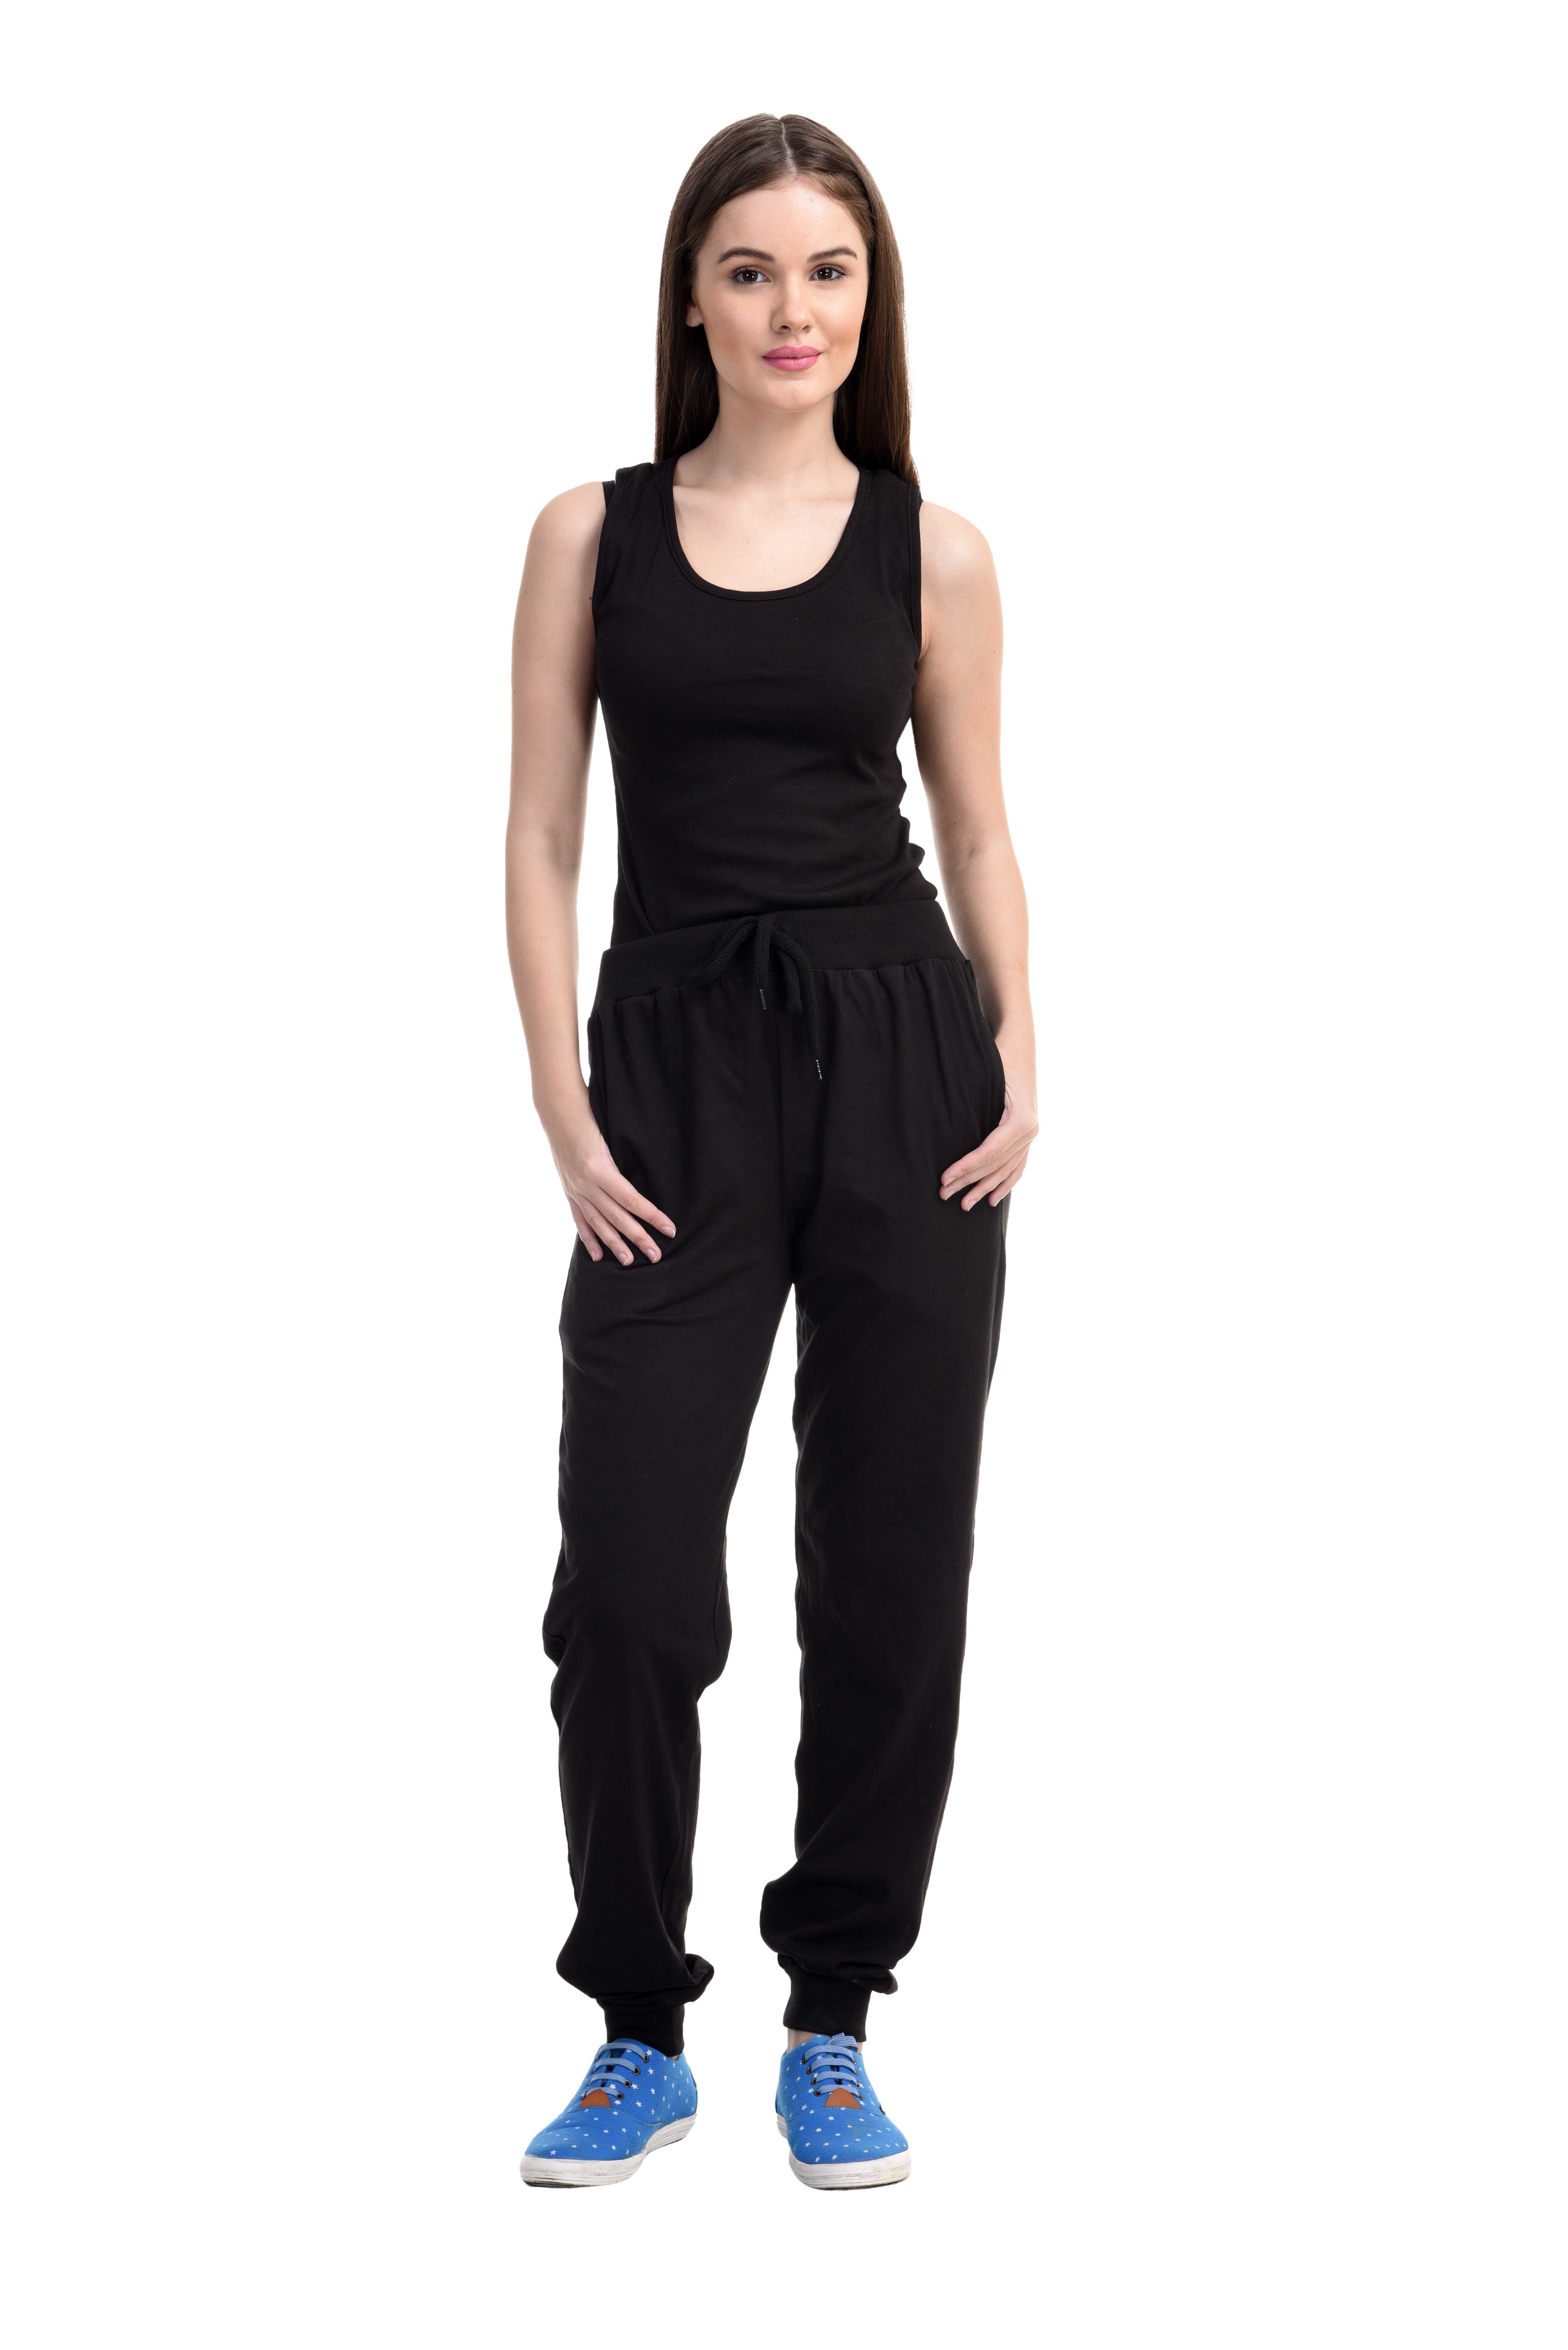 Buy KINMA Womens Cotton Track Pants Online @ ₹599 from ShopClues